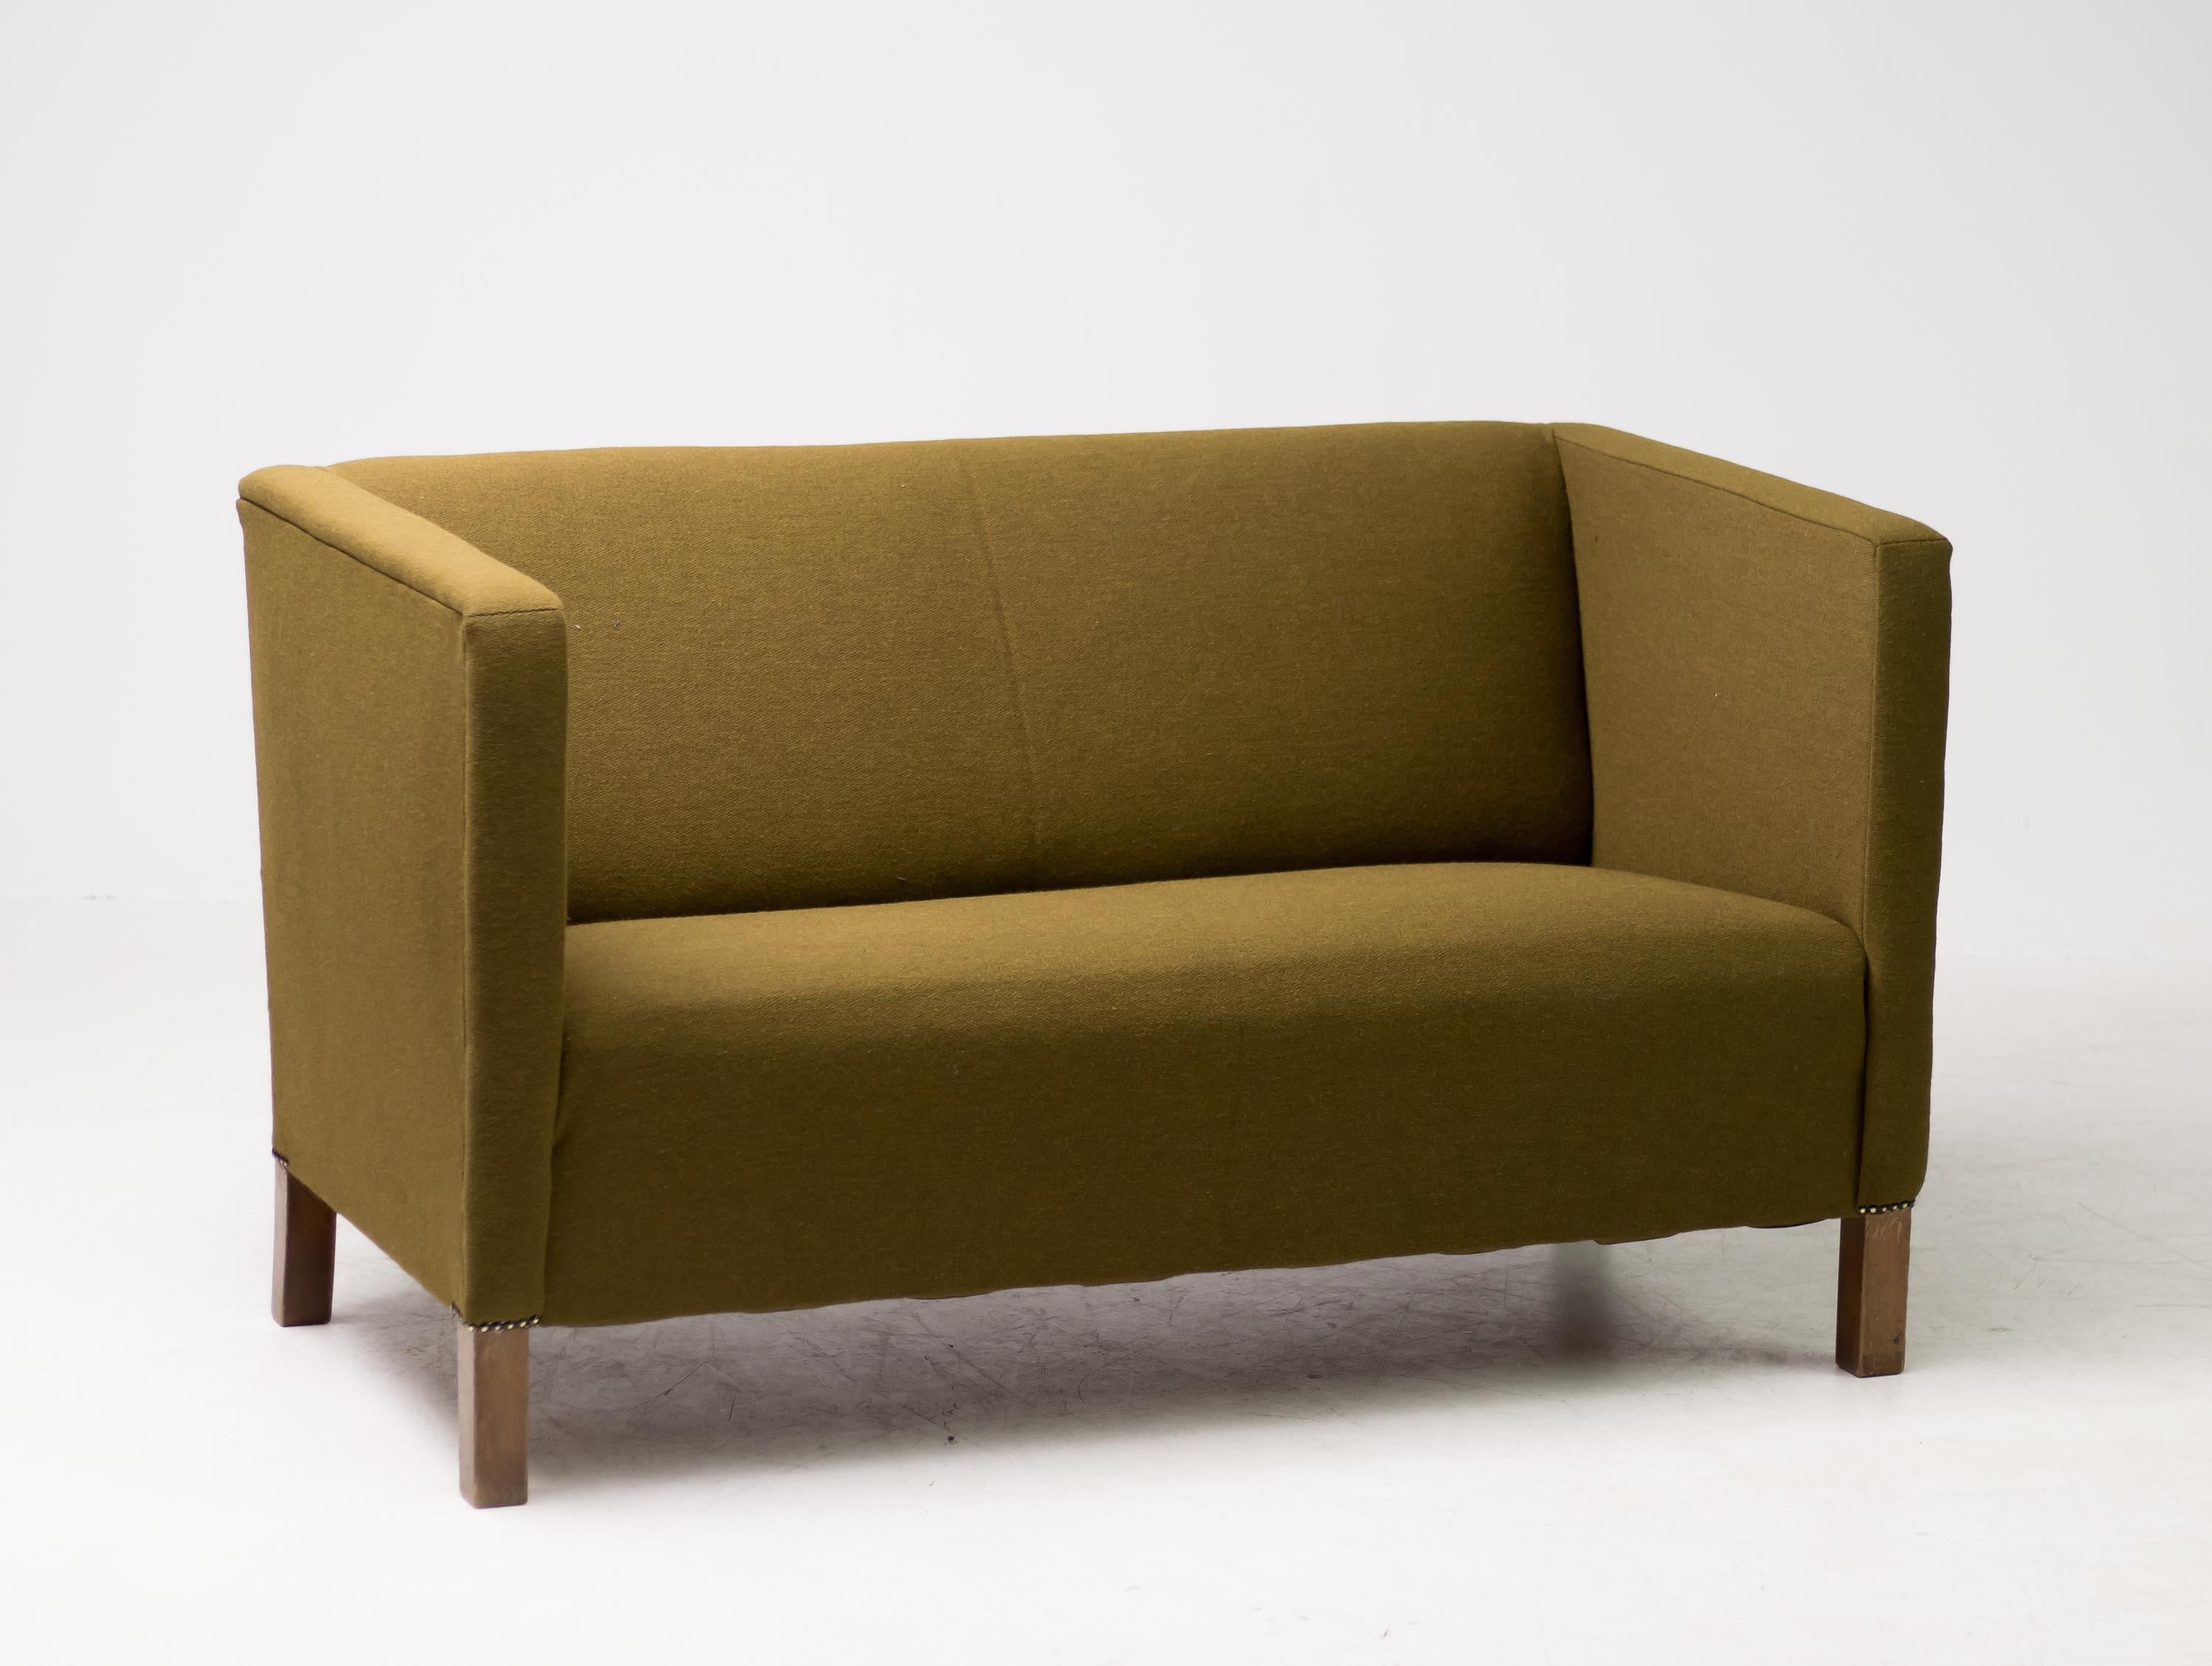 Danish modern sofa, manufactured circa 1942 by Fritz Hansen. 
Classic construction with a beech frame, coil springs and horsehair.
Recently reupholstered in a beautiful new old stock moss green wool.

Literature: Fritz Hansen catalogue 4202 from